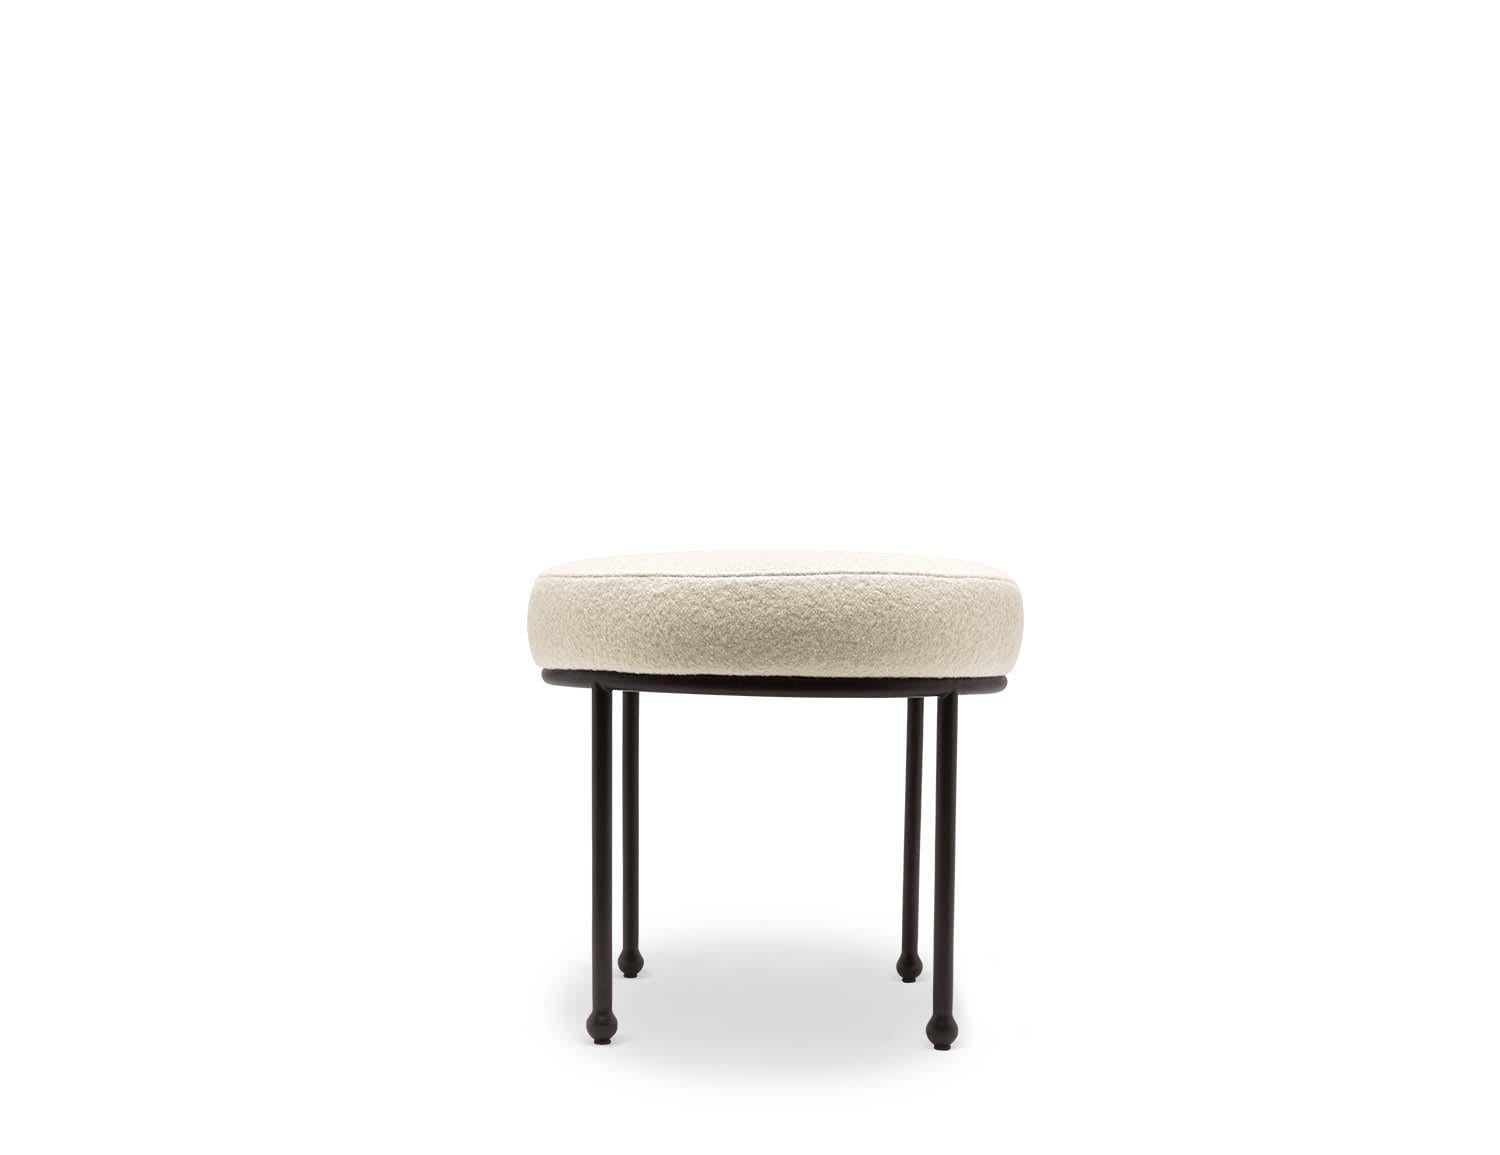 The Petite Orsini Ottoman features a minimal metal base with decorative ball feet and an upholstered seat. 

The Lawson-Fenning Collection is designed and handmade in Los Angeles, California. Reach out to discover what options are currently in